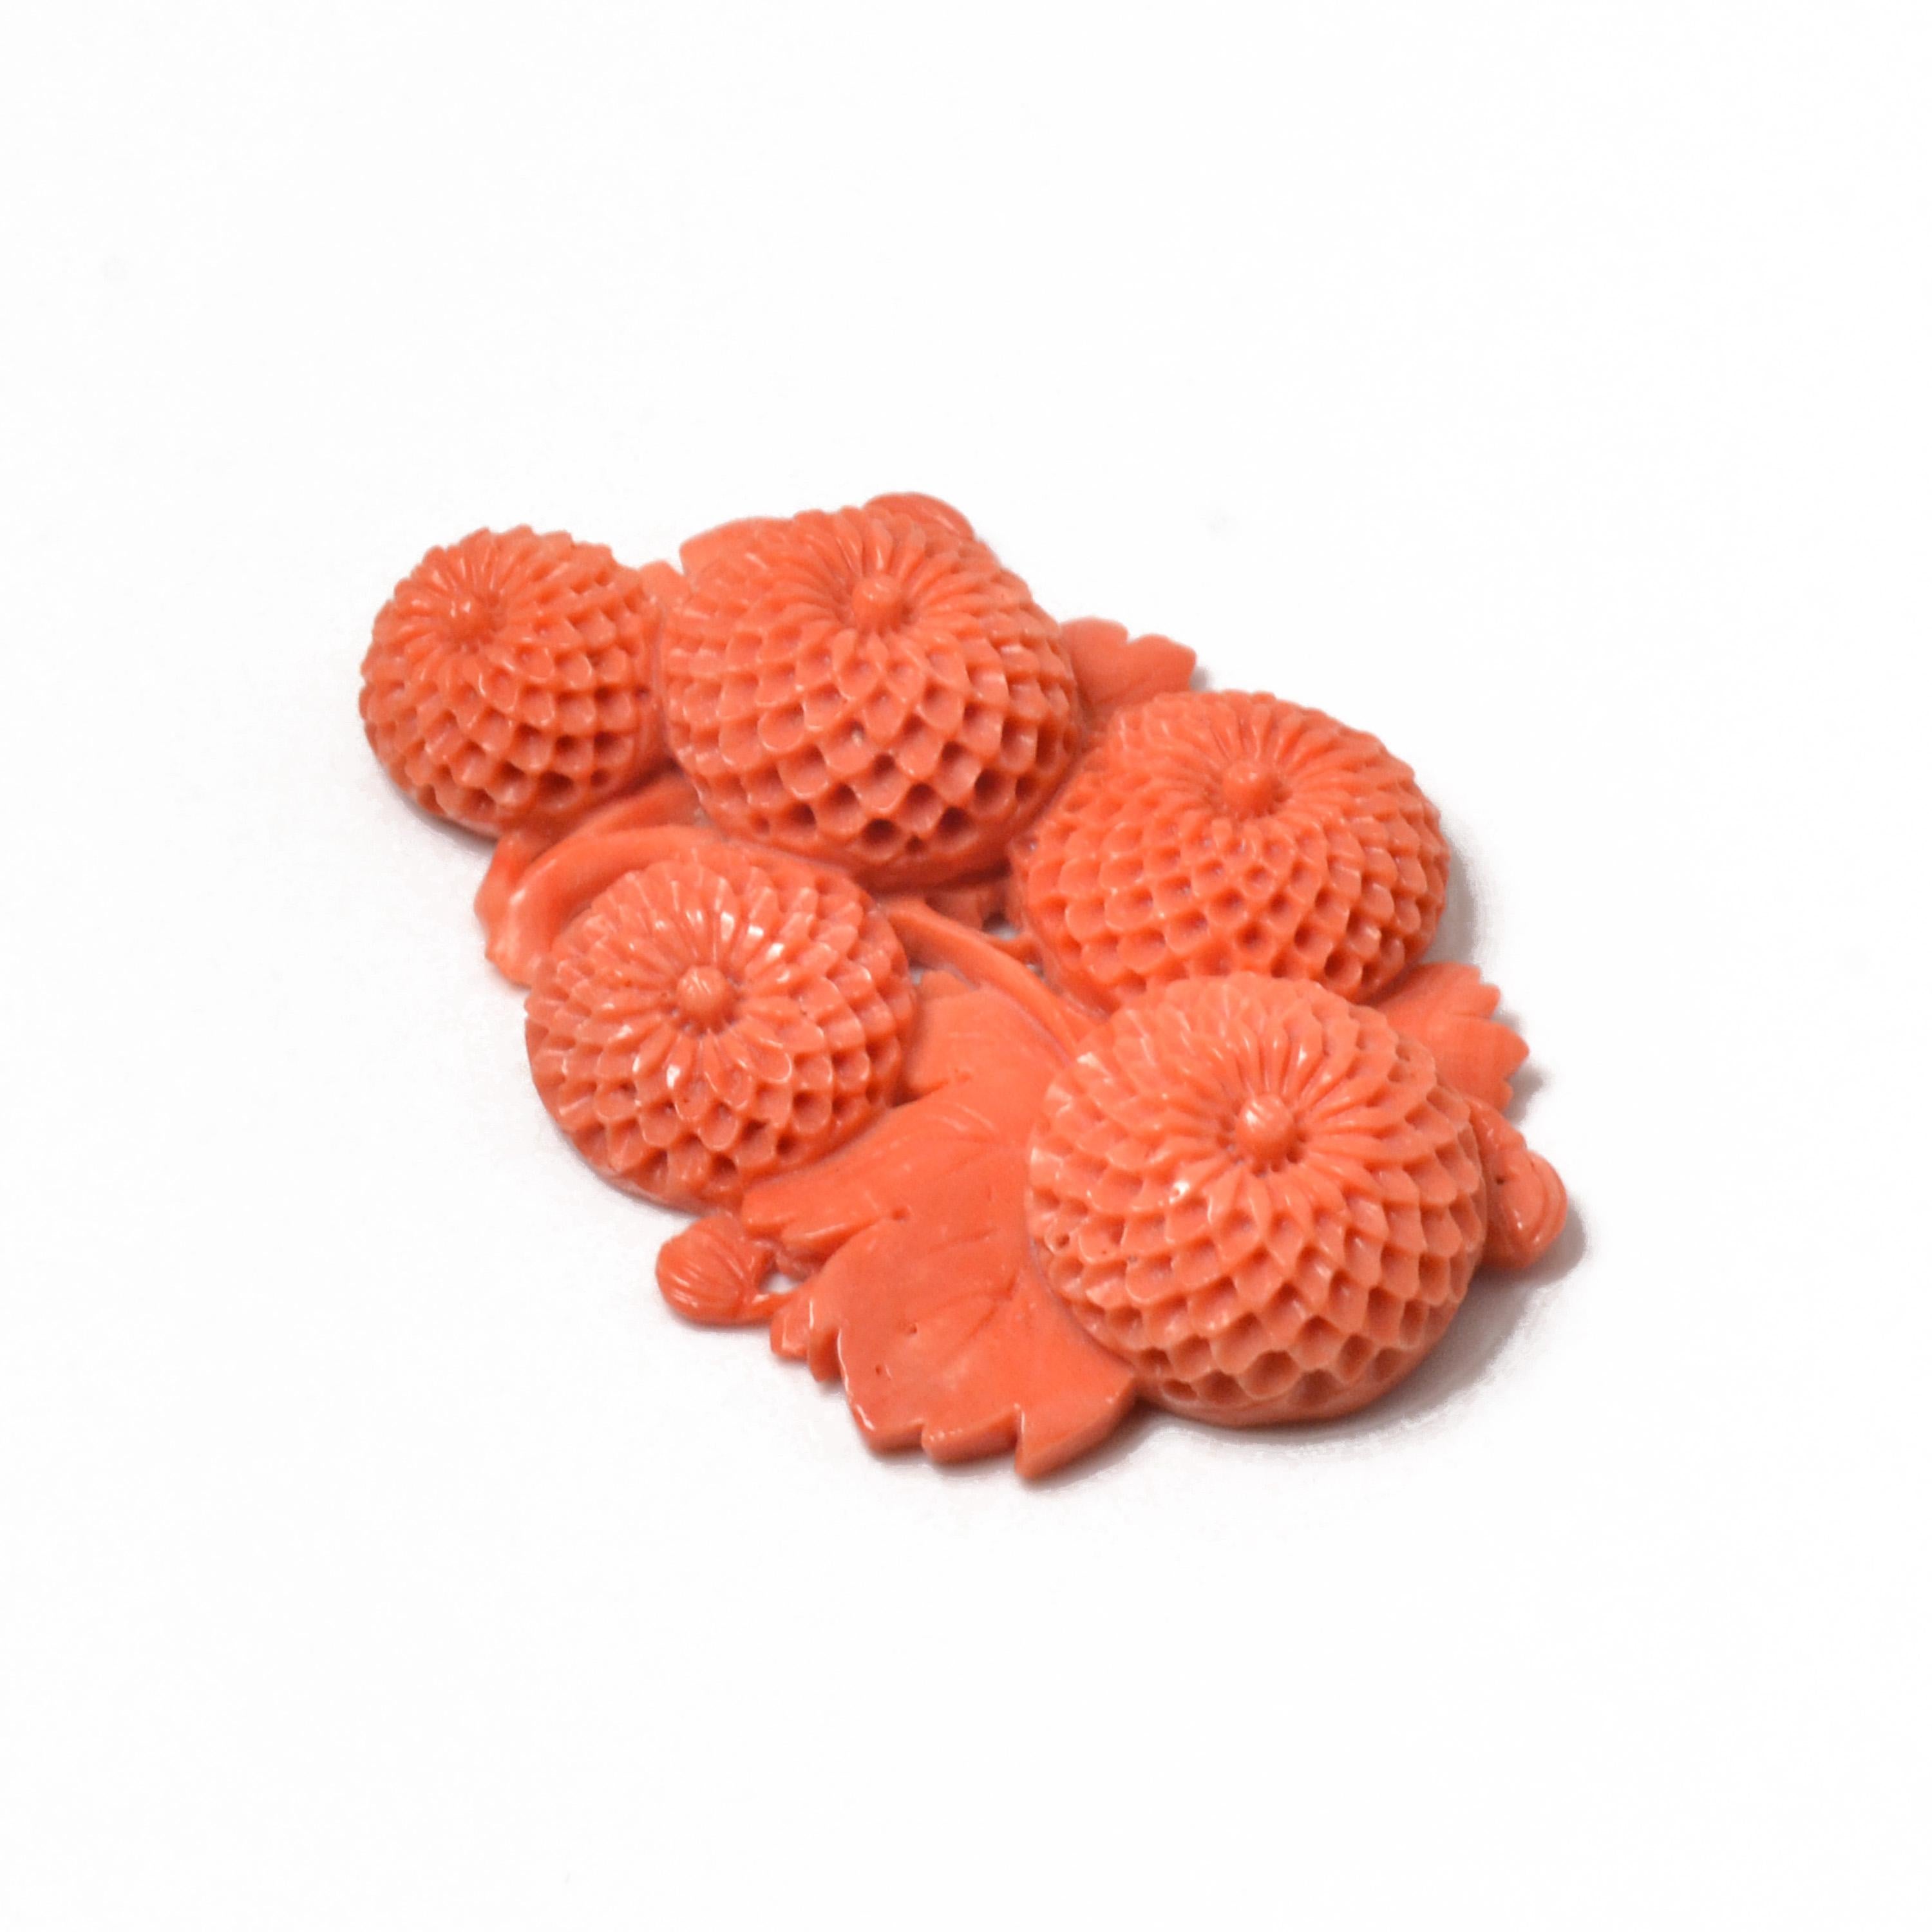 Mixed Cut Vintage Japanese Momoiro Sango Carved Coral Plate, Chrysanthemum For Sale